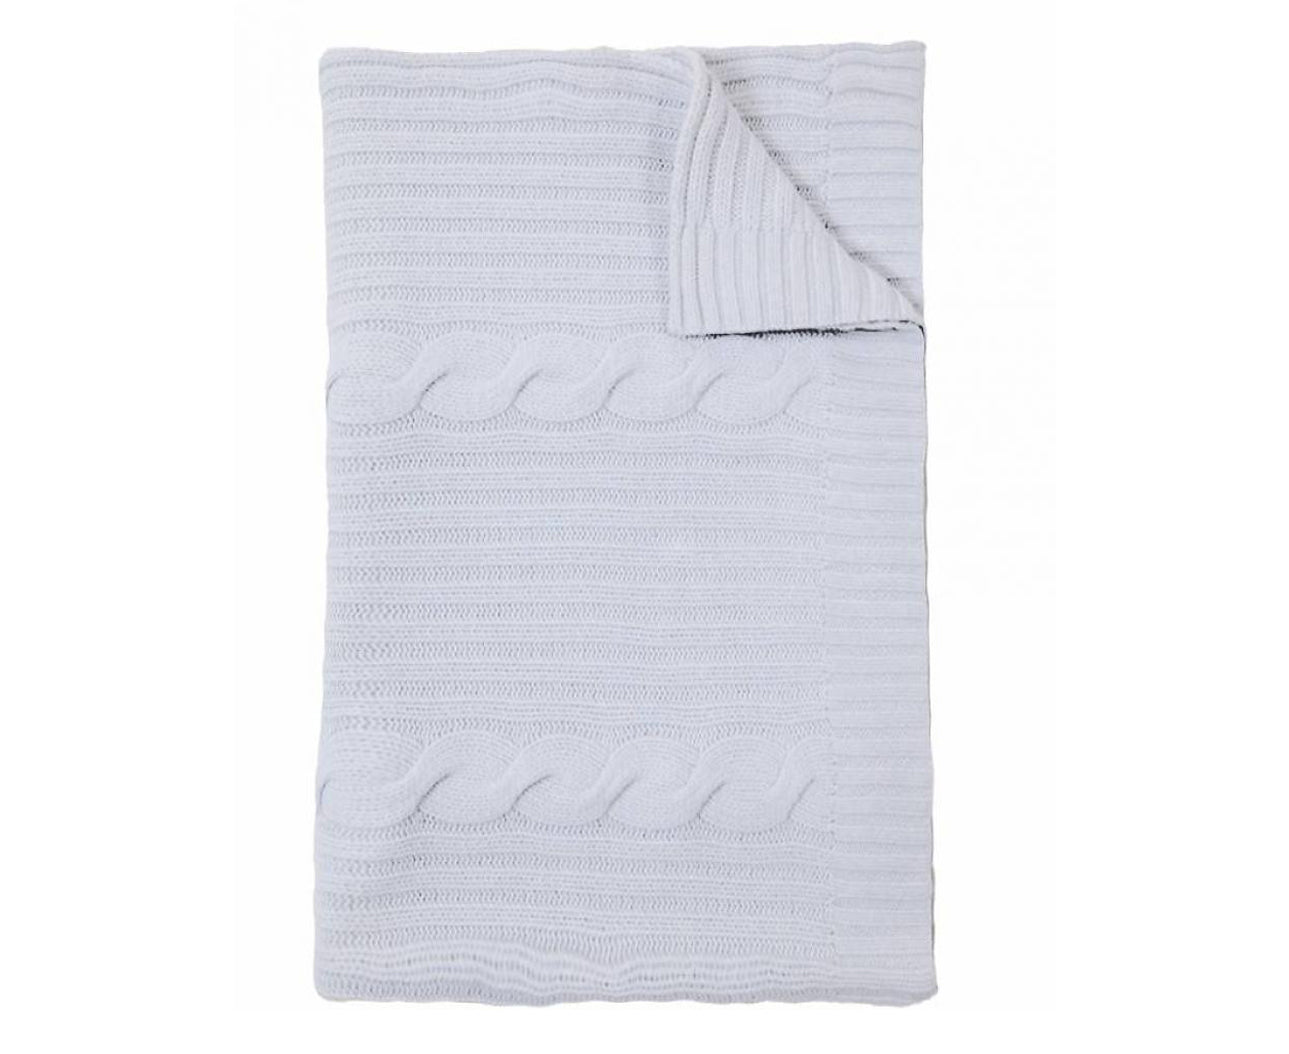 Roma Cable Knit Cashmere Throw - Light Blue | DSHOP